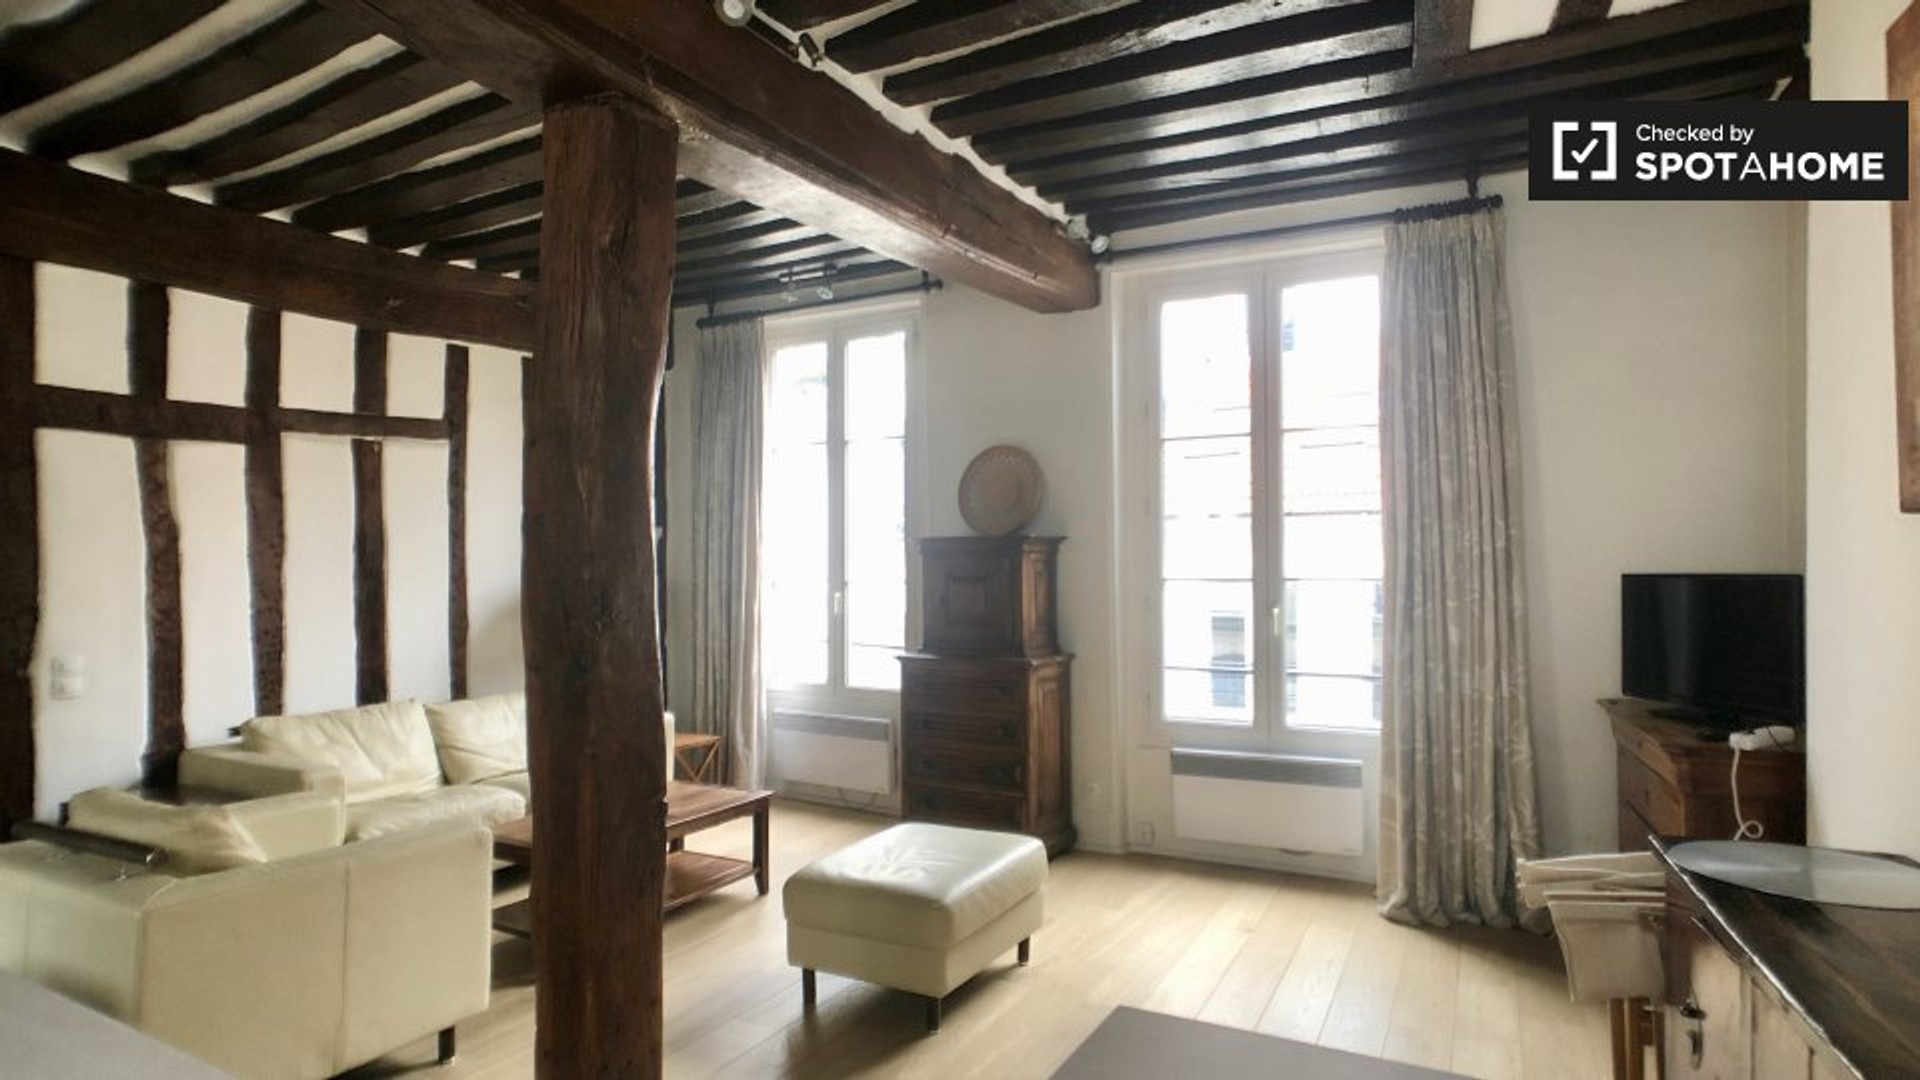 Accommodation in the centre of Paris